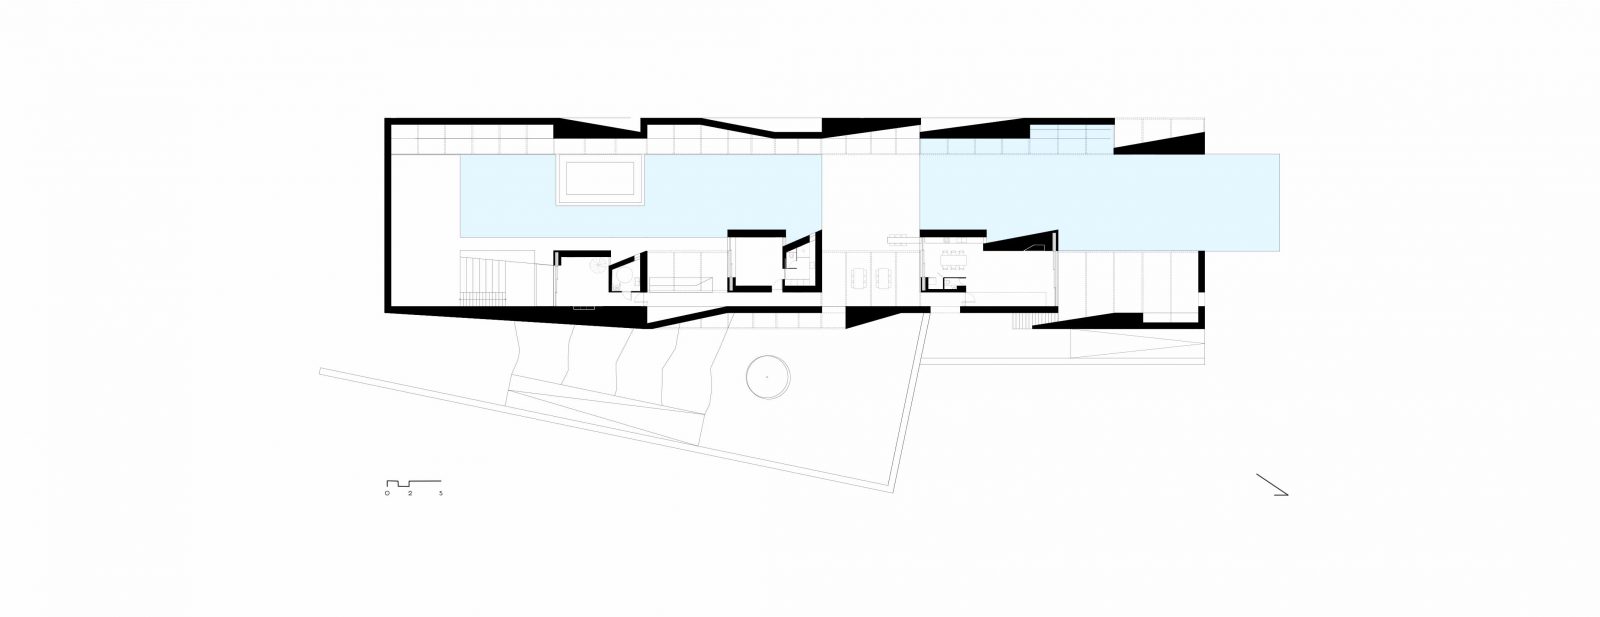 Archisearch STRIP PROJECT  |  Mold Architects